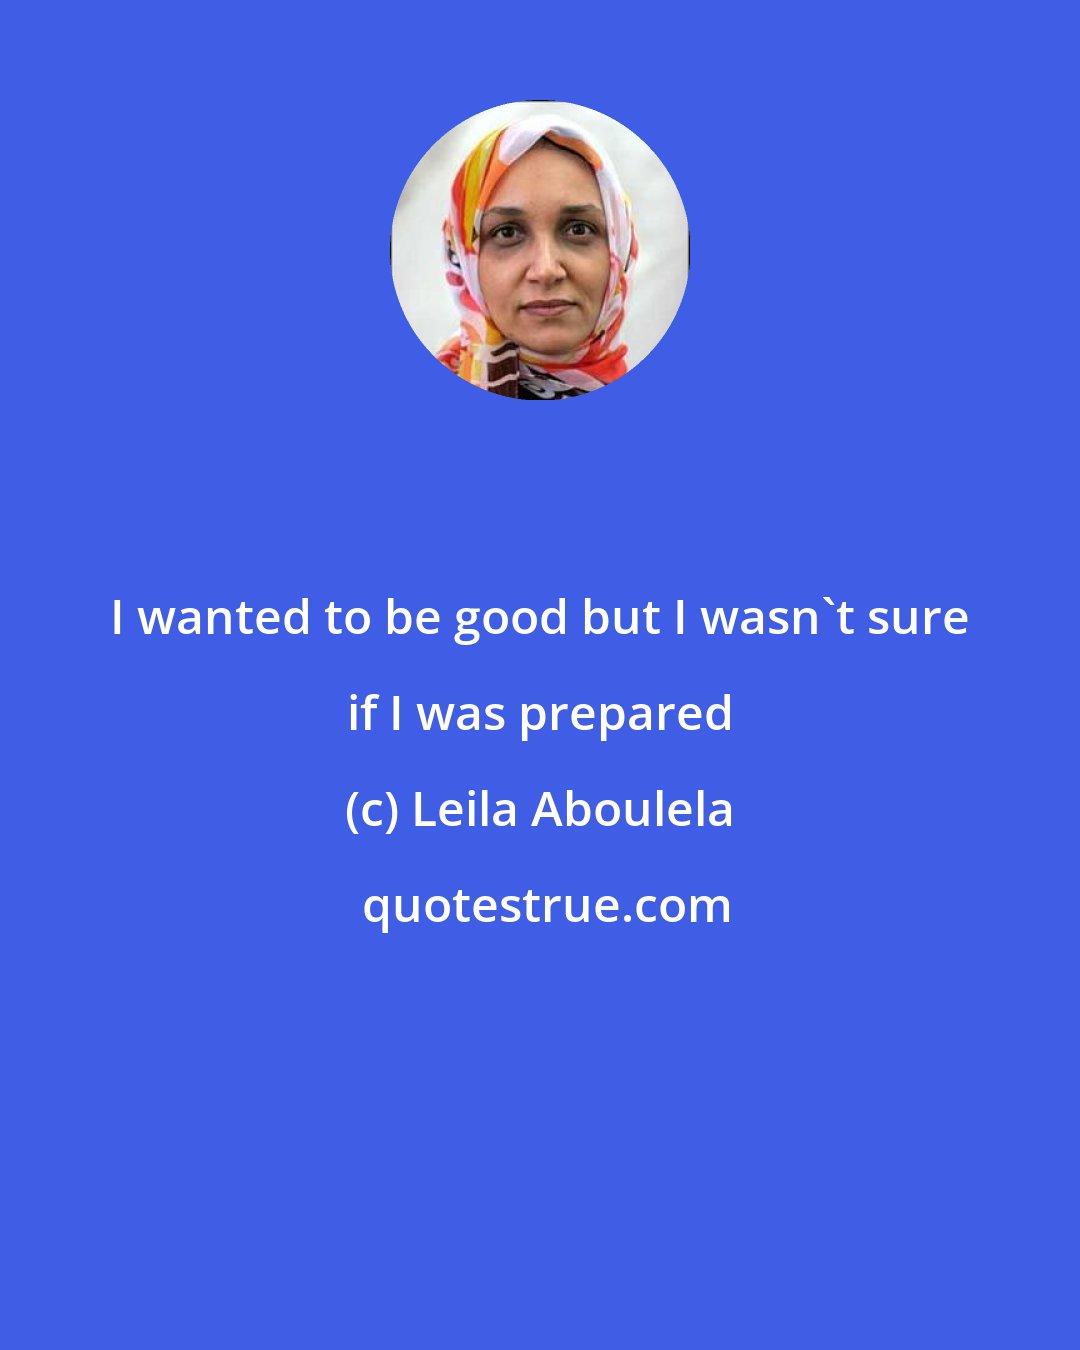 Leila Aboulela: I wanted to be good but I wasn't sure if I was prepared